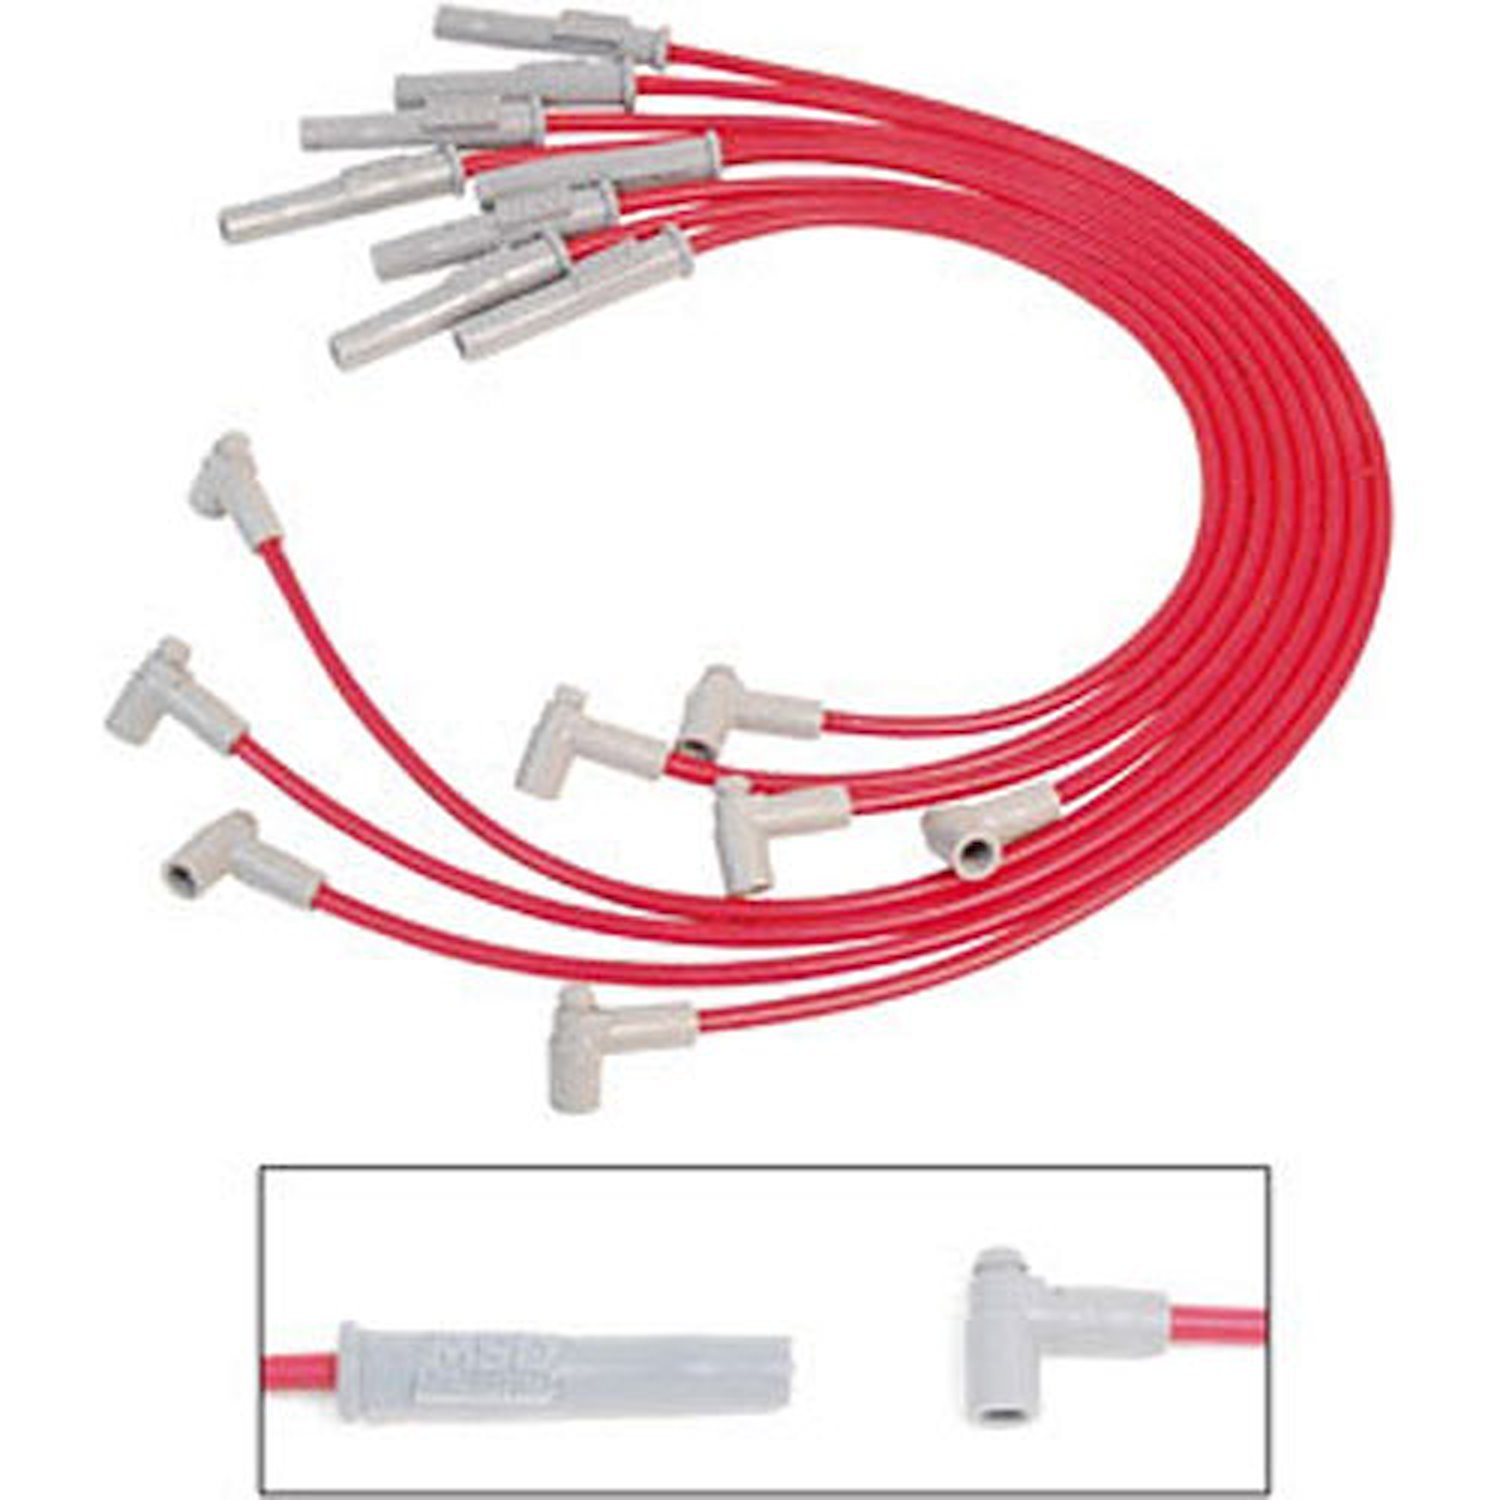 35379 Super Conductor 8.5mm Wires Red